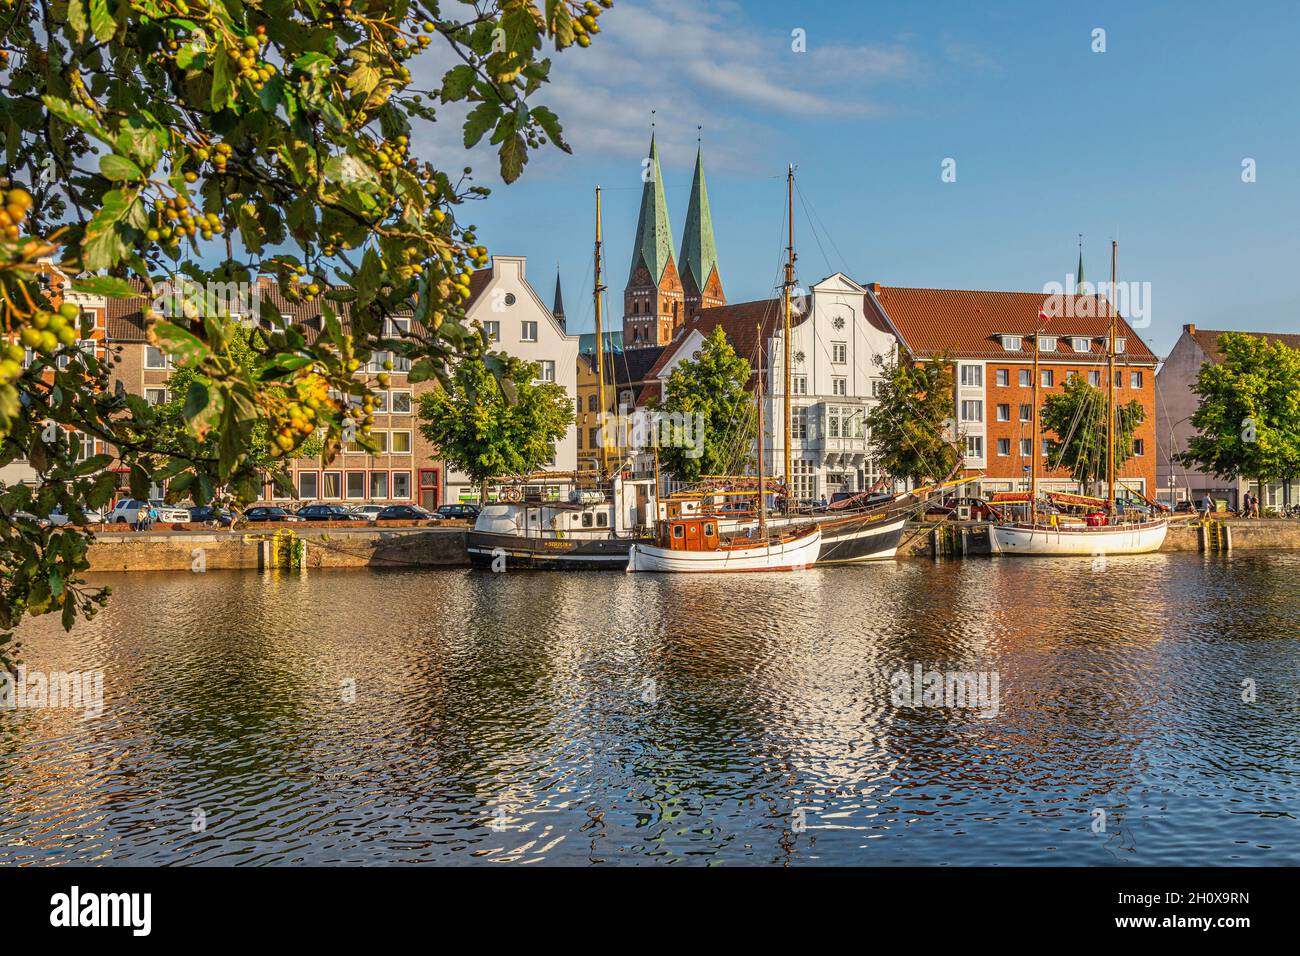 Lübeck, fishing and tourism boats moored on the river Trave.The two Gothic bell towers of the curch of Santa Maria. Lübeck, Germany Stock Photo